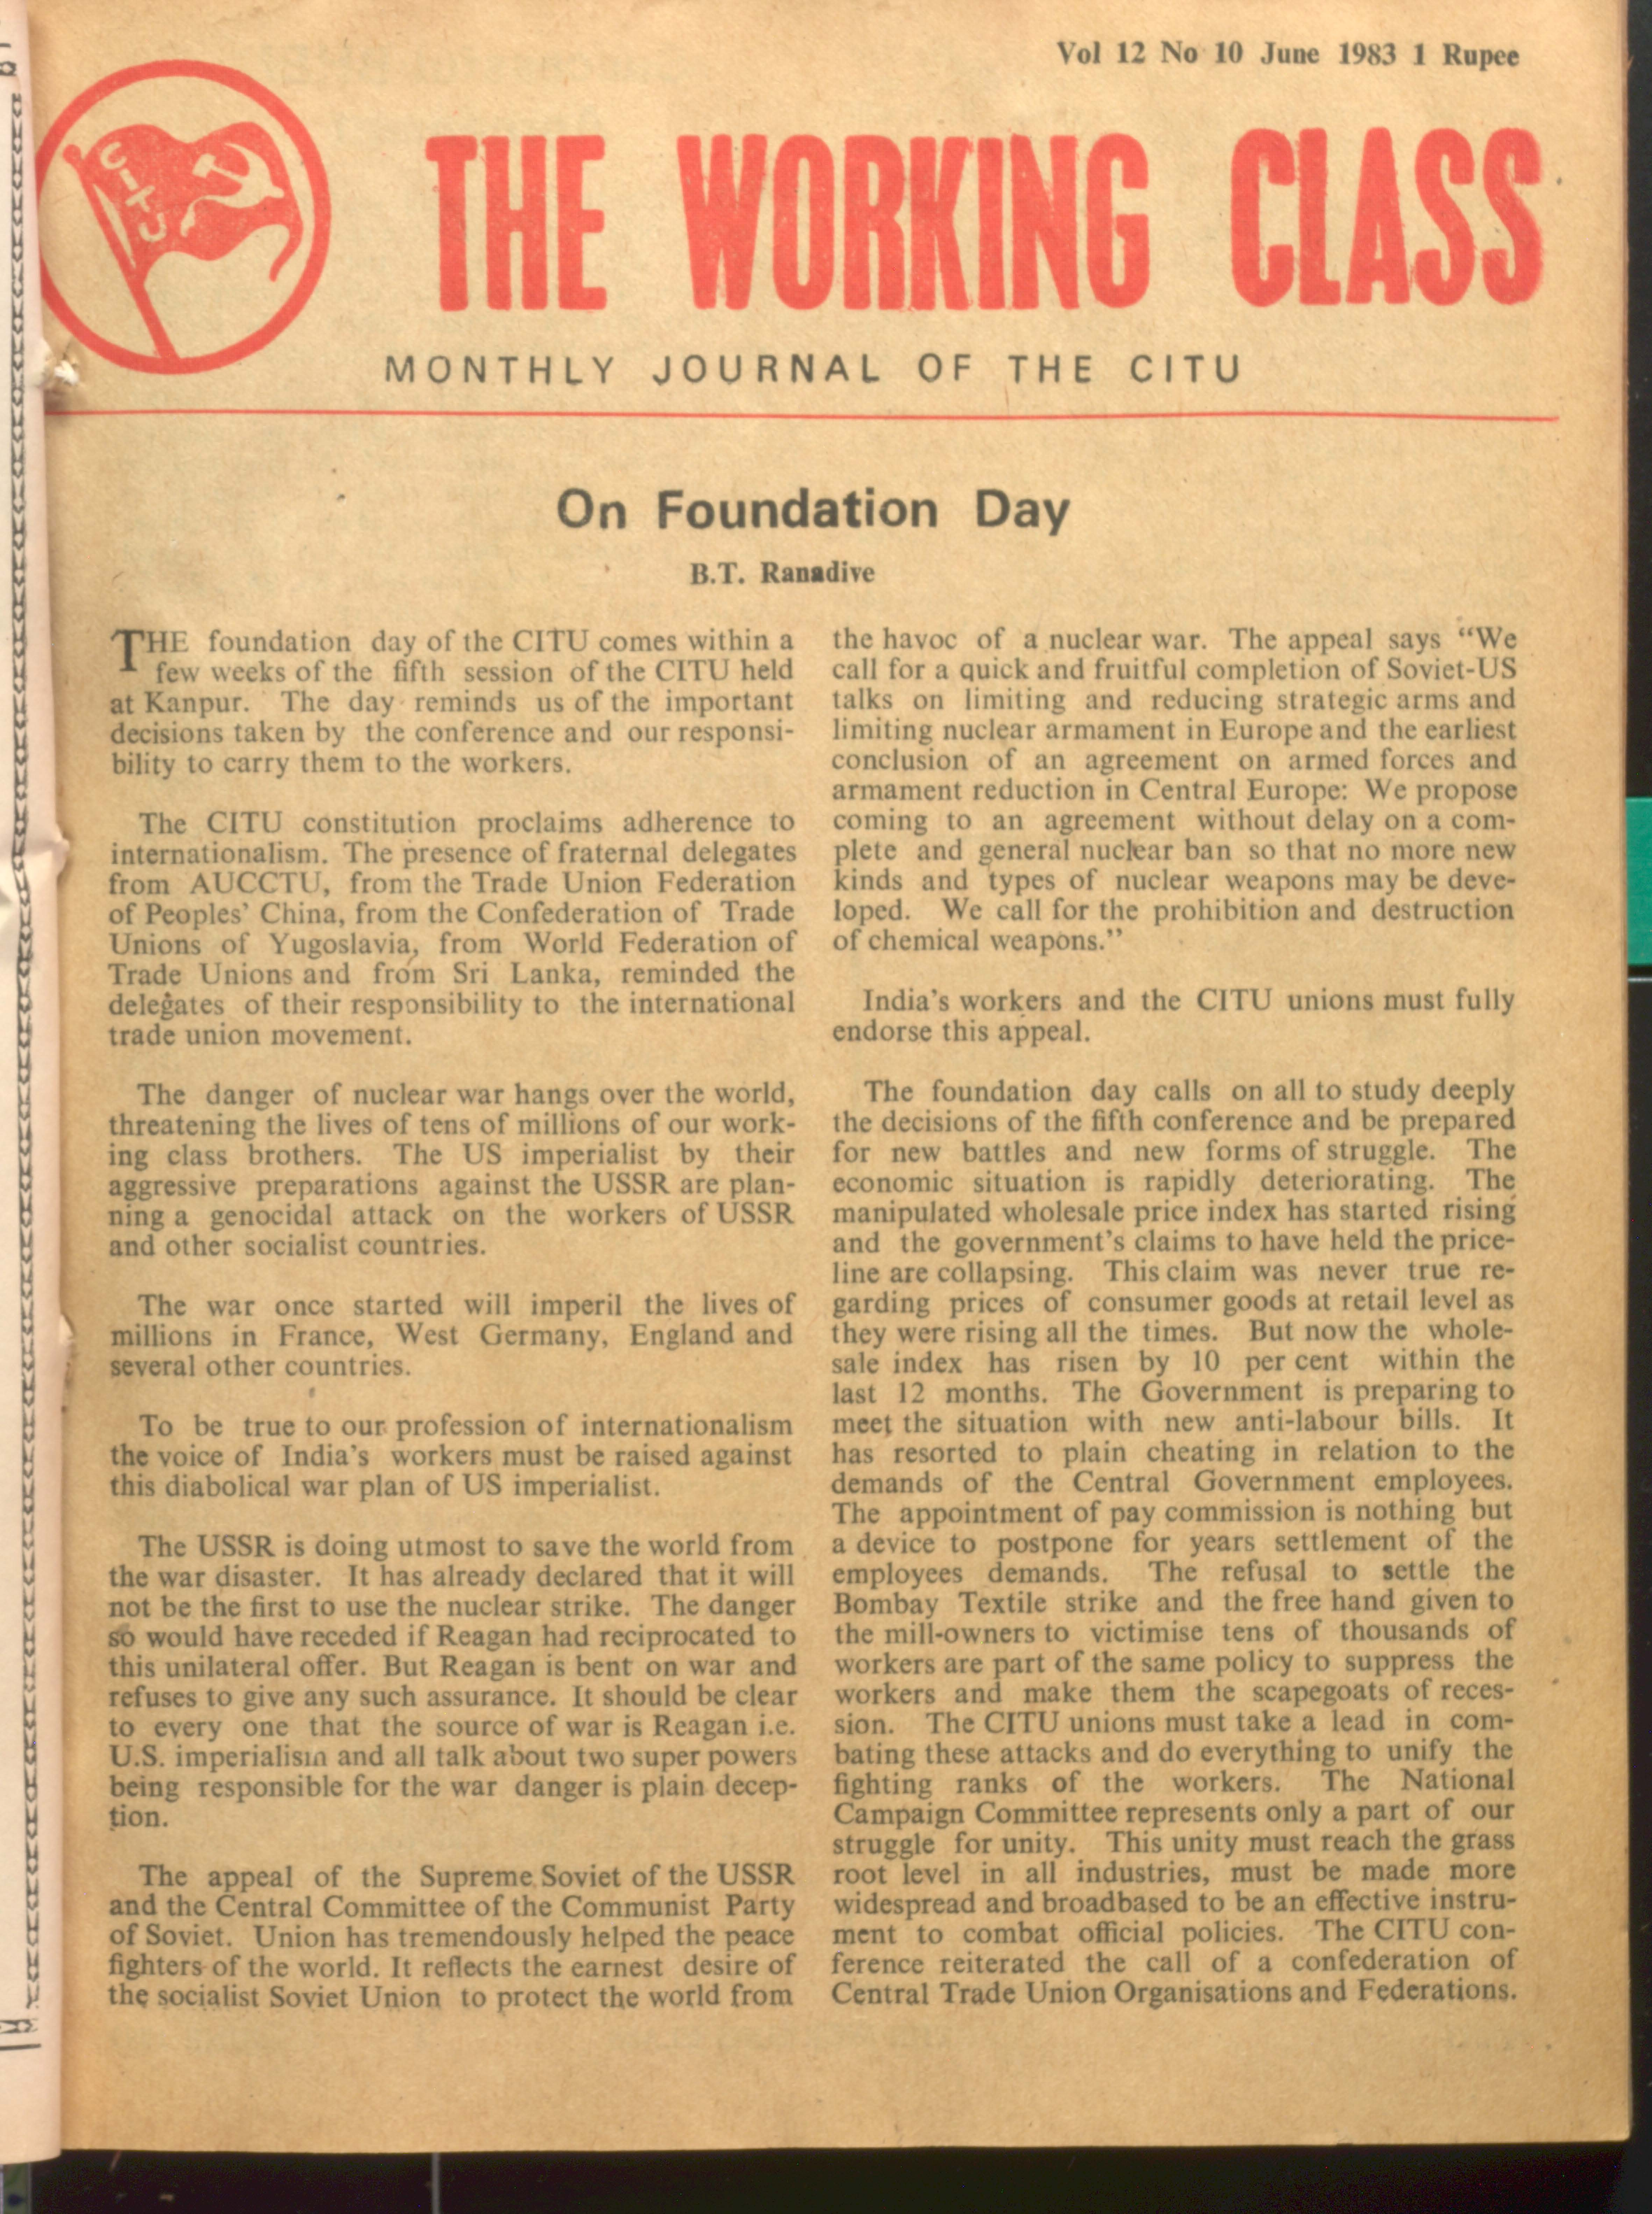 The Working clasMonthly Journal of the Citu